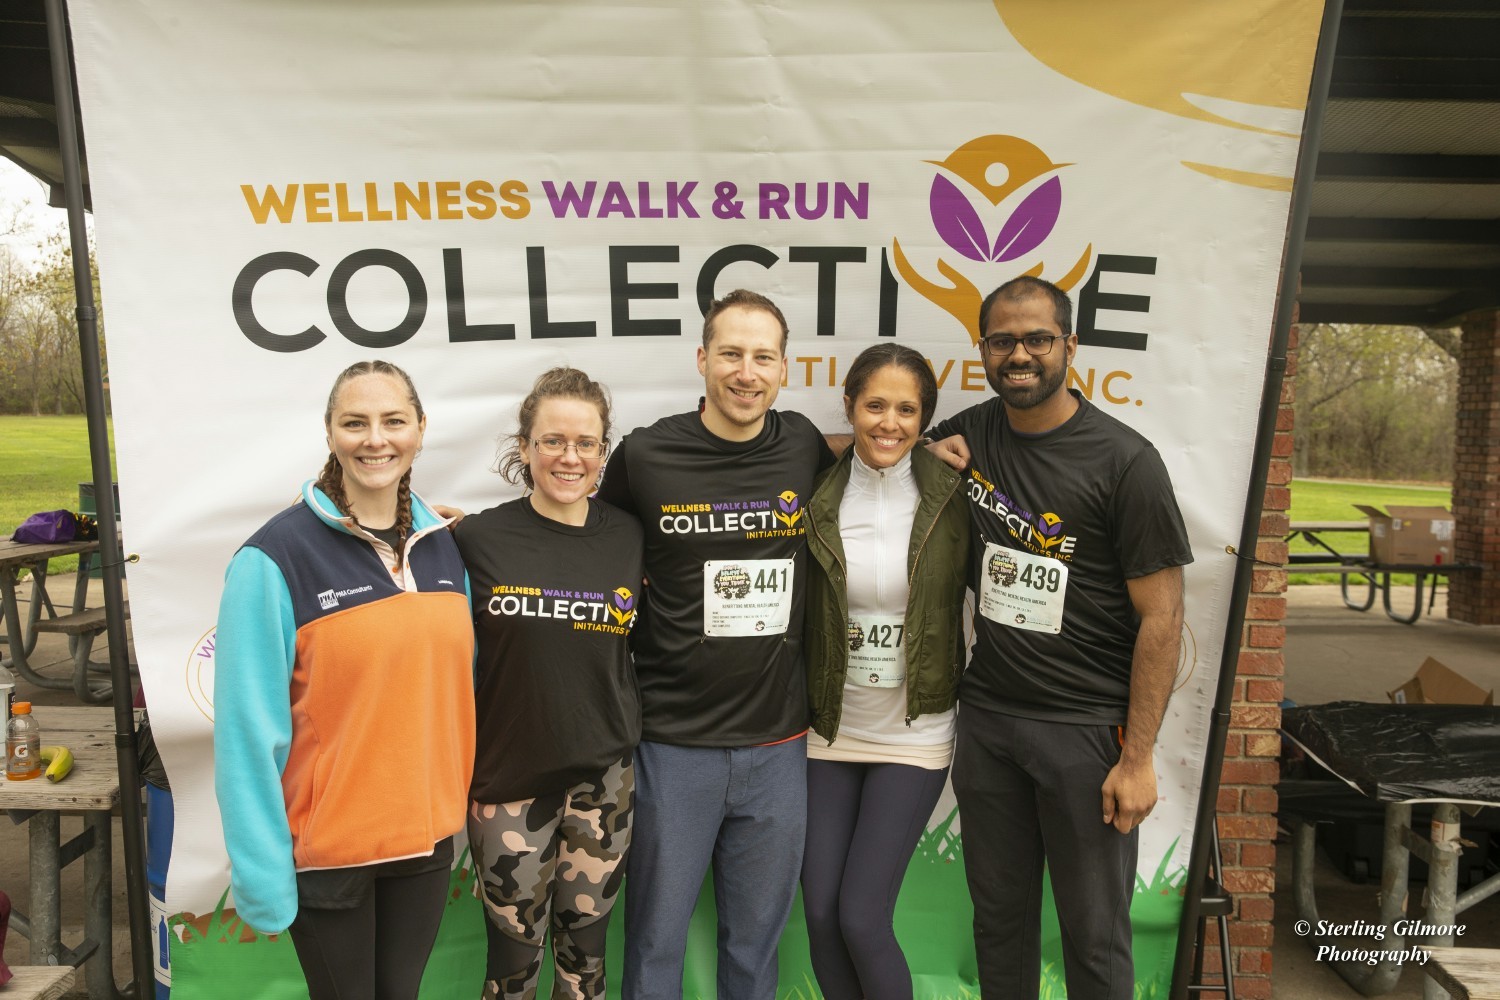 PMA's Chicago office participates in the Collective Walk & Run event as part of our Corporate Responsibility program.